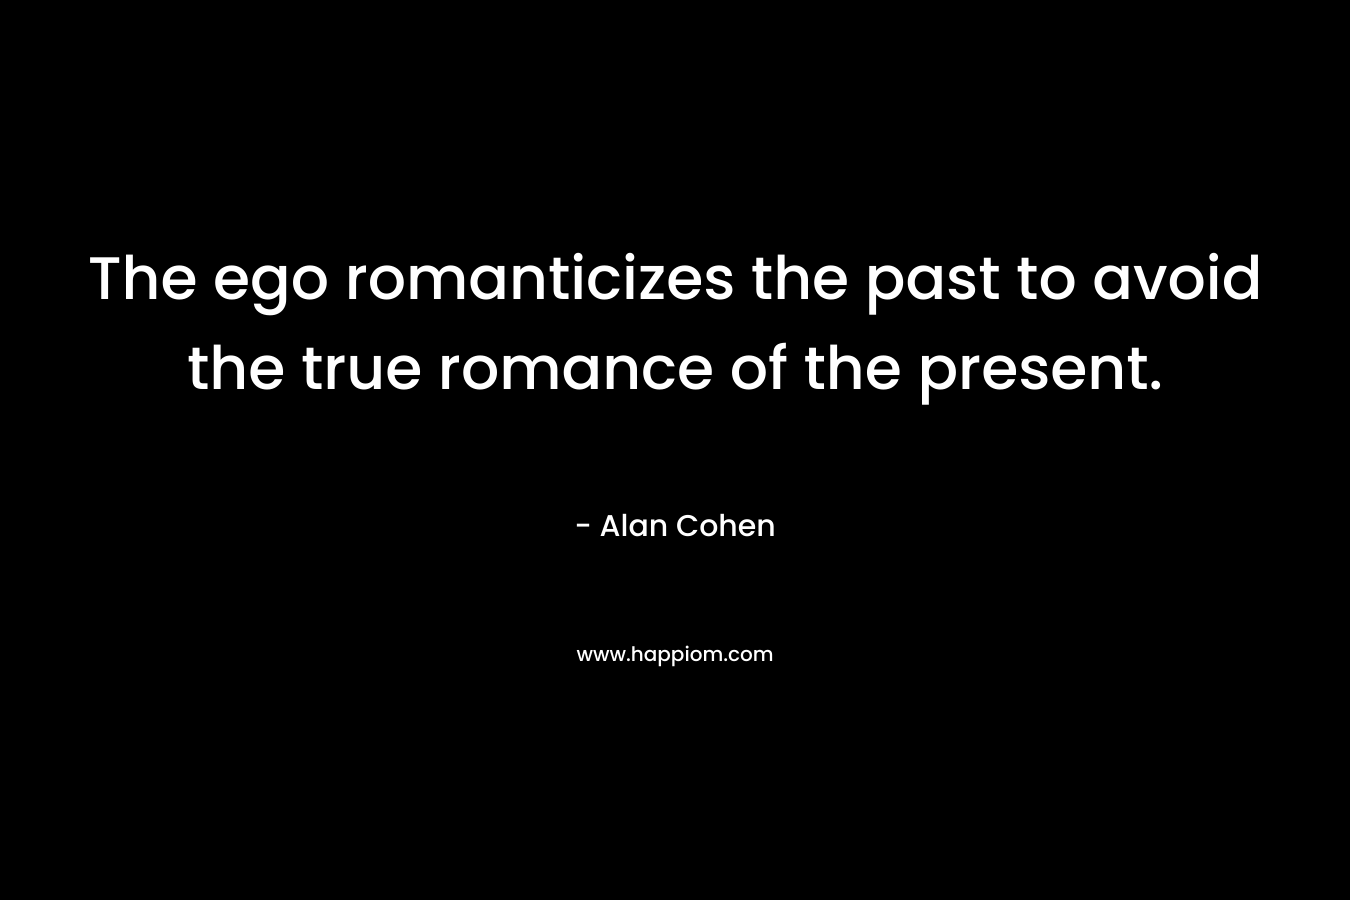 The ego romanticizes the past to avoid the true romance of the present. – Alan Cohen